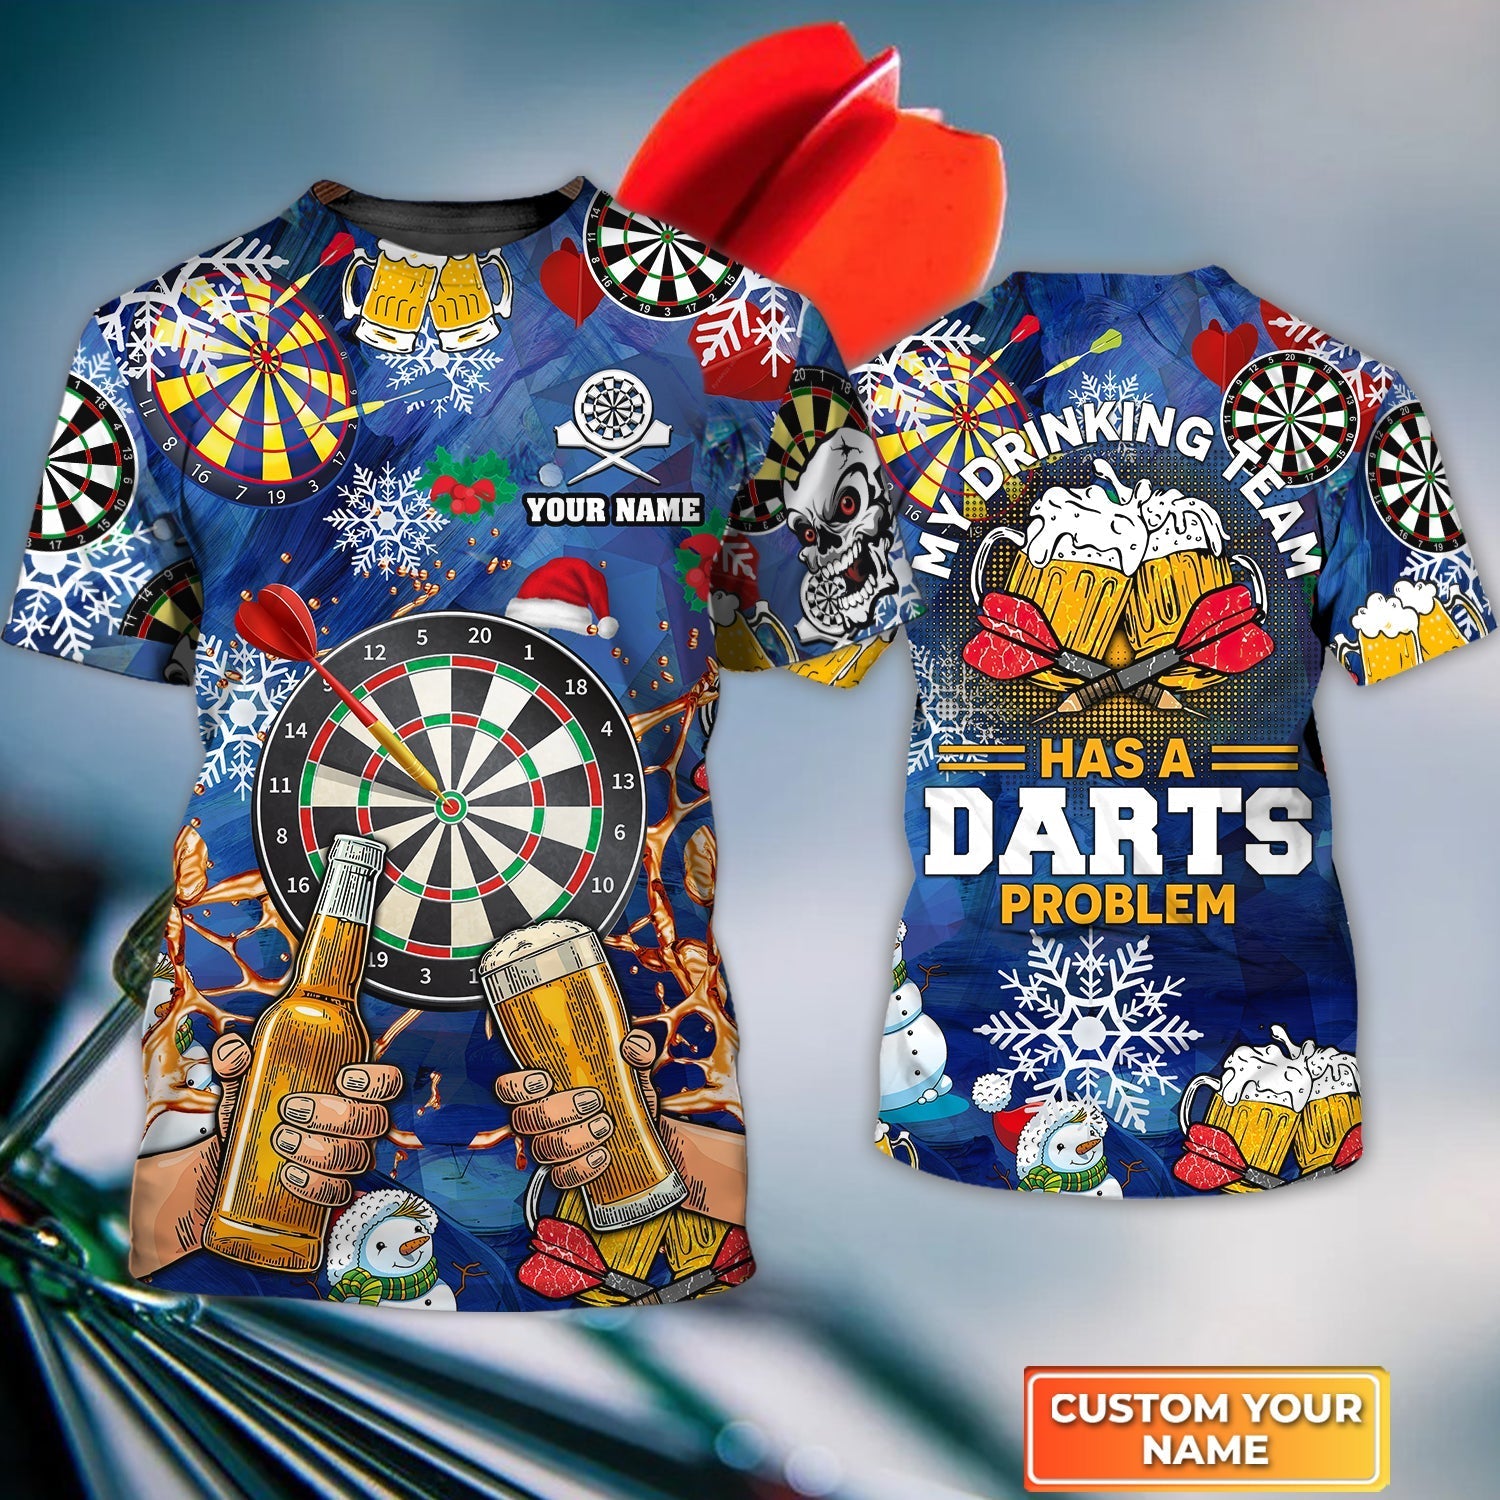 My Drinking Team Has A Darts Problem Christmas Gift Personalized Name 3D Tshirt For Darts Player – DT202